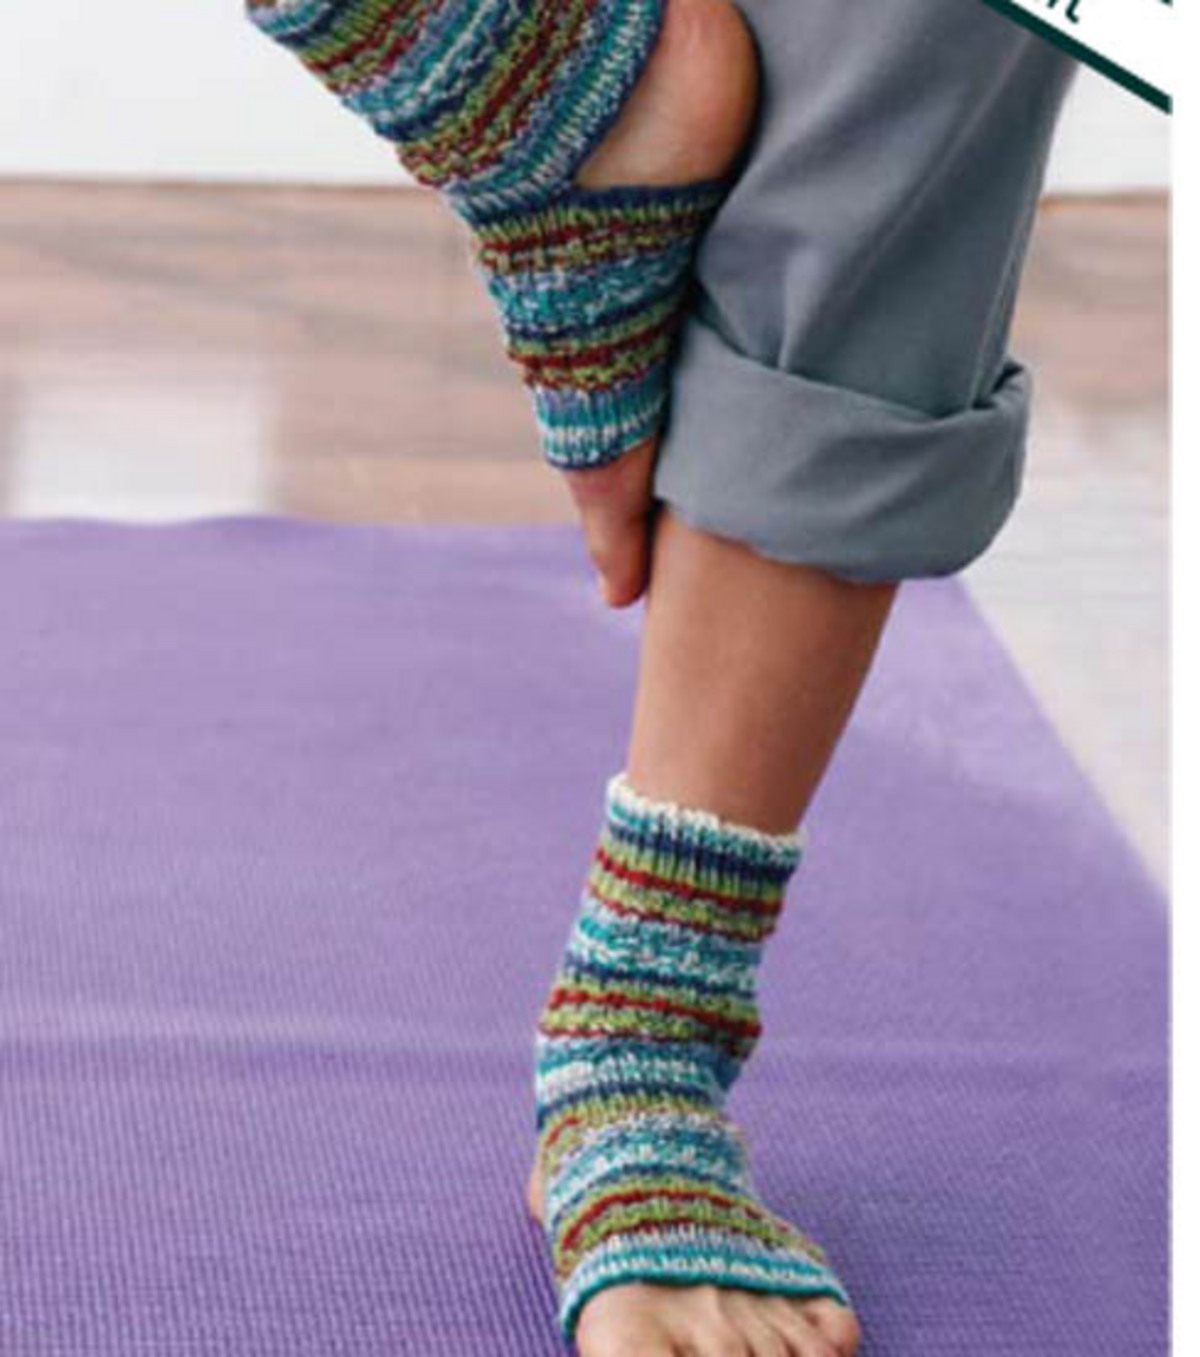 Knitting Pattern For Yoga Socks Knit A Pair Of Yoga Socks Free Knitting Pattern